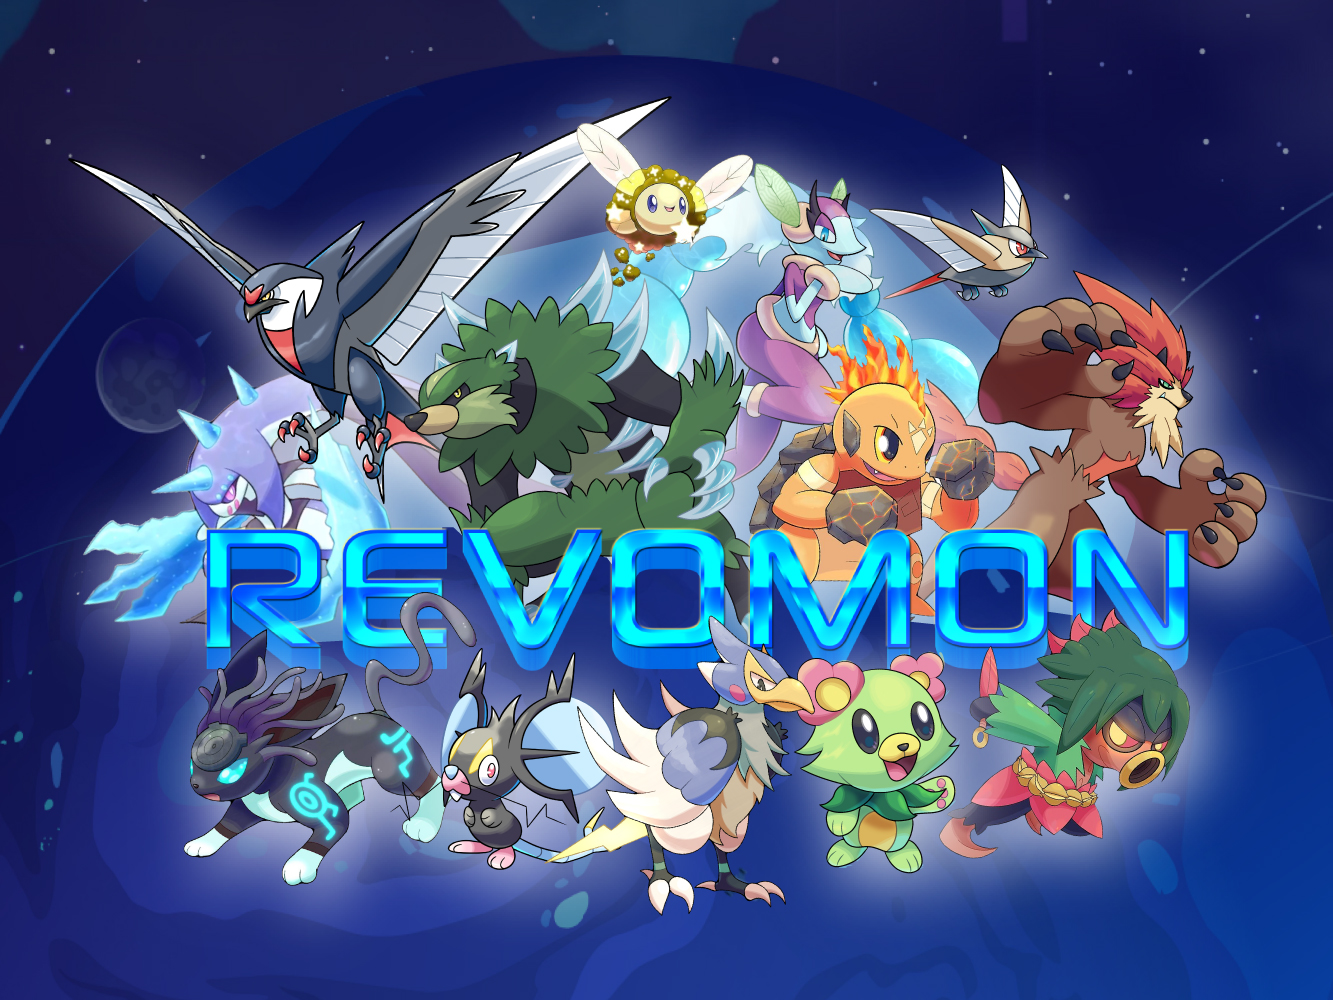 Revomon is an exciting new online role-playing metaverse (RPG) that combines an incredible, immersive virtual-reality experience with the ground-breaking technology behind non-fungible tokens (NFTs). This synergy will allow for the creation of real value in a virtual world by leveraging highlight.